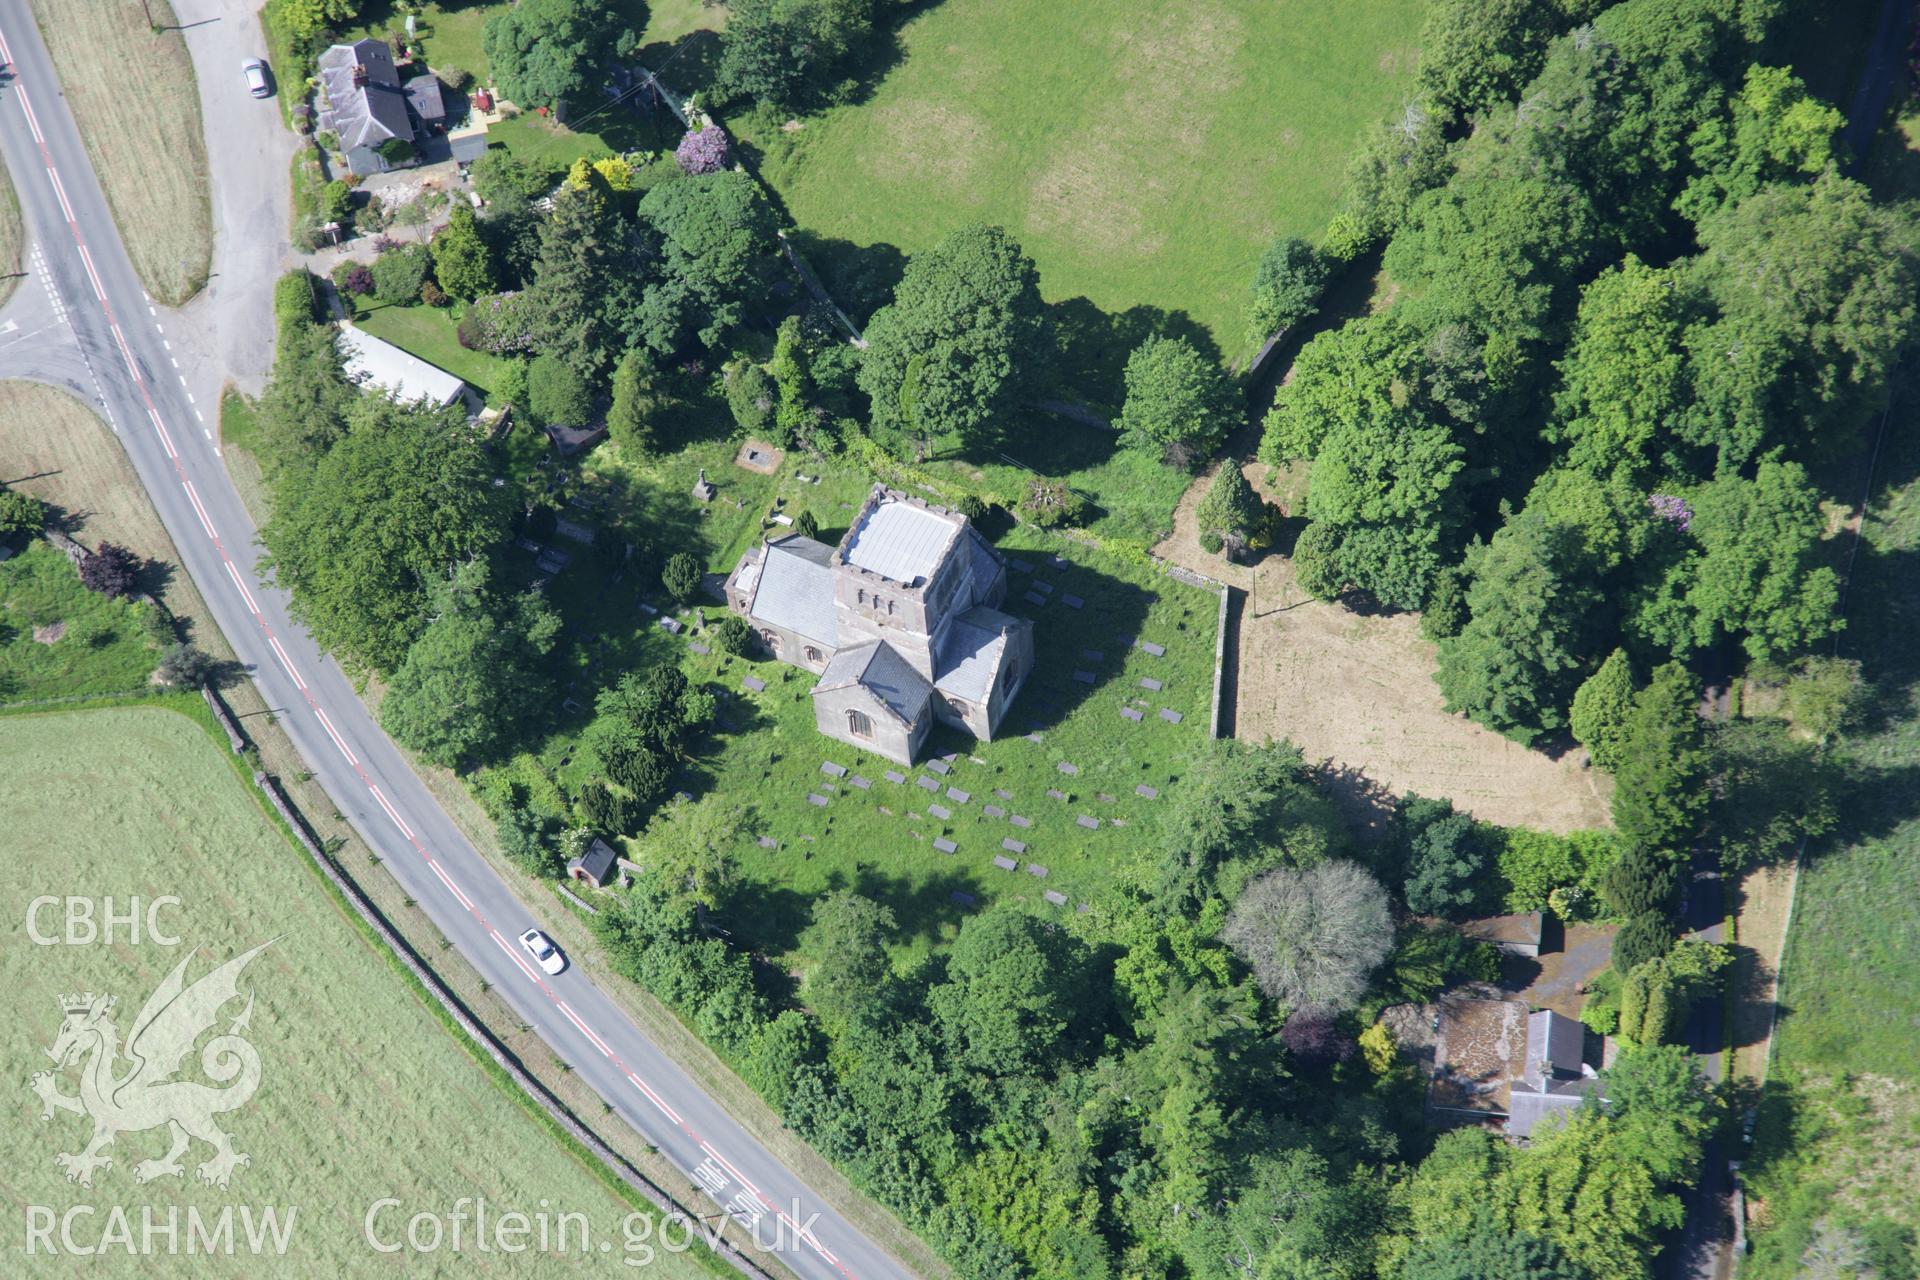 RCAHMW colour oblique aerial photograph of St Buan's Church from the south-east. Taken on 14 June 2006 by Toby Driver.